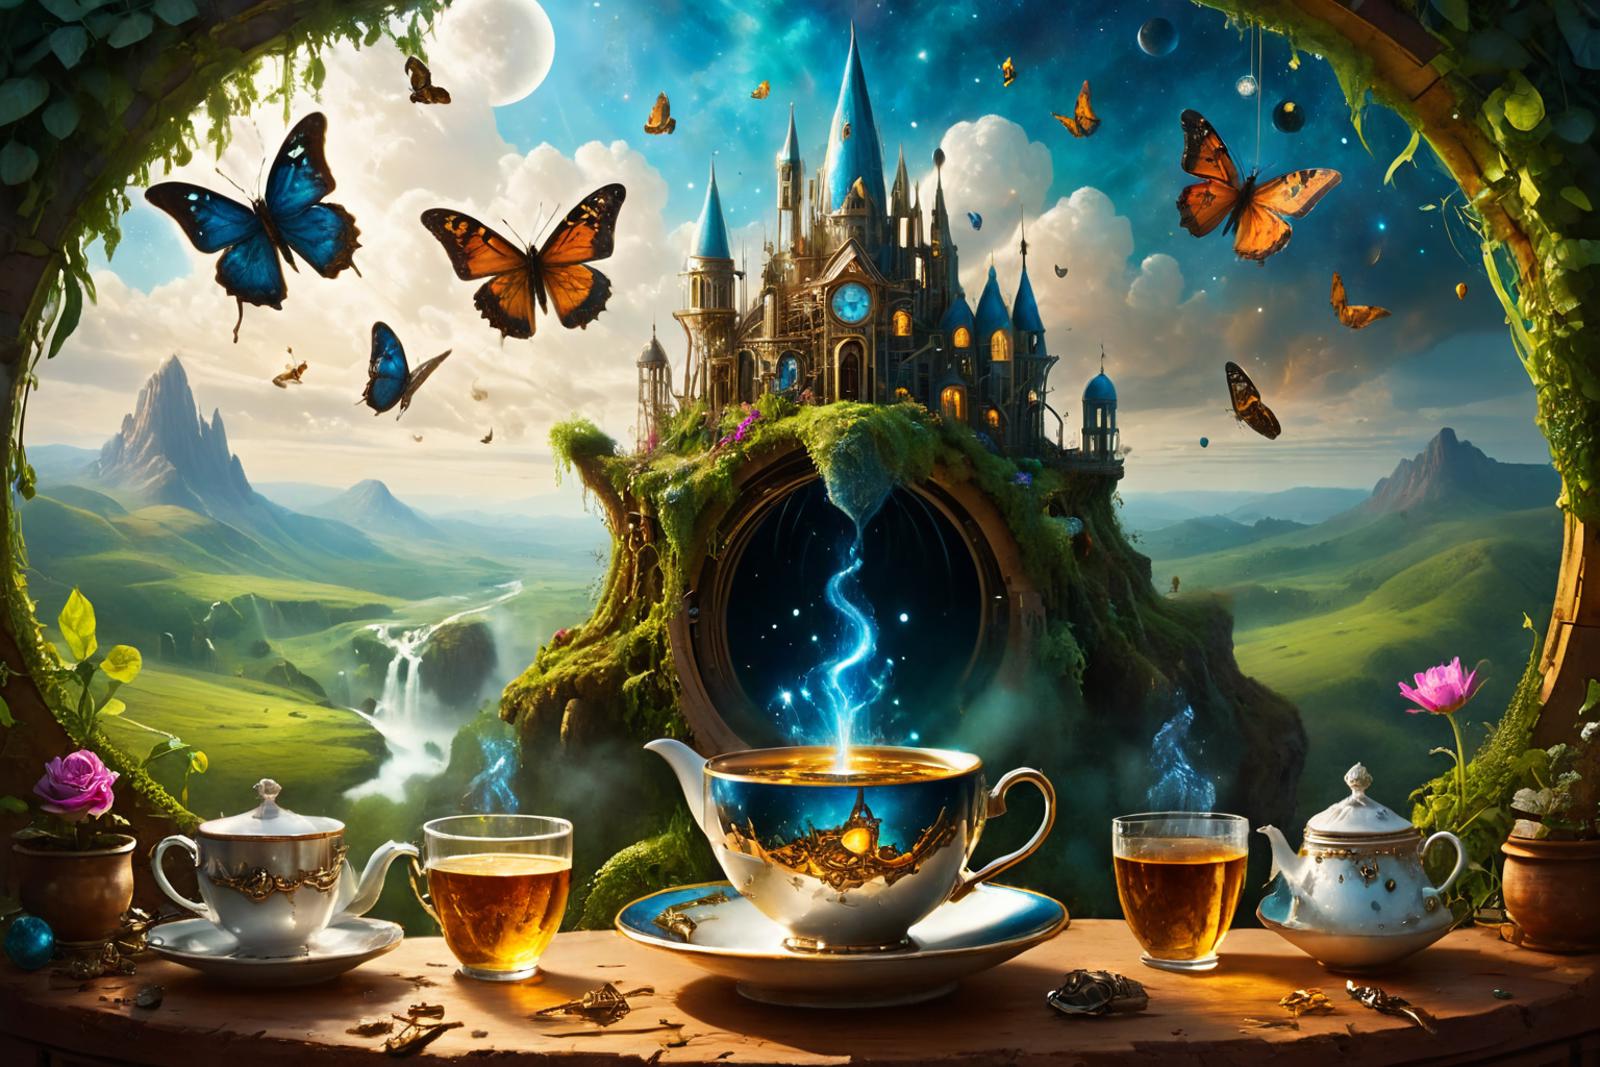 A fantasy painting of a castle with butterflies and a steaming mug of tea.